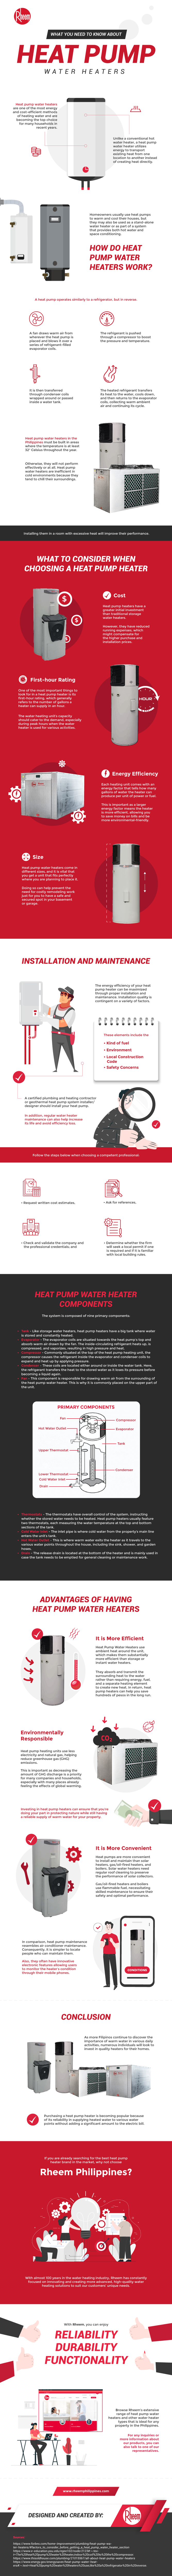 What-You-Need-to-Know-About-Heat-Pump-Water-Heaters-awdnska1231